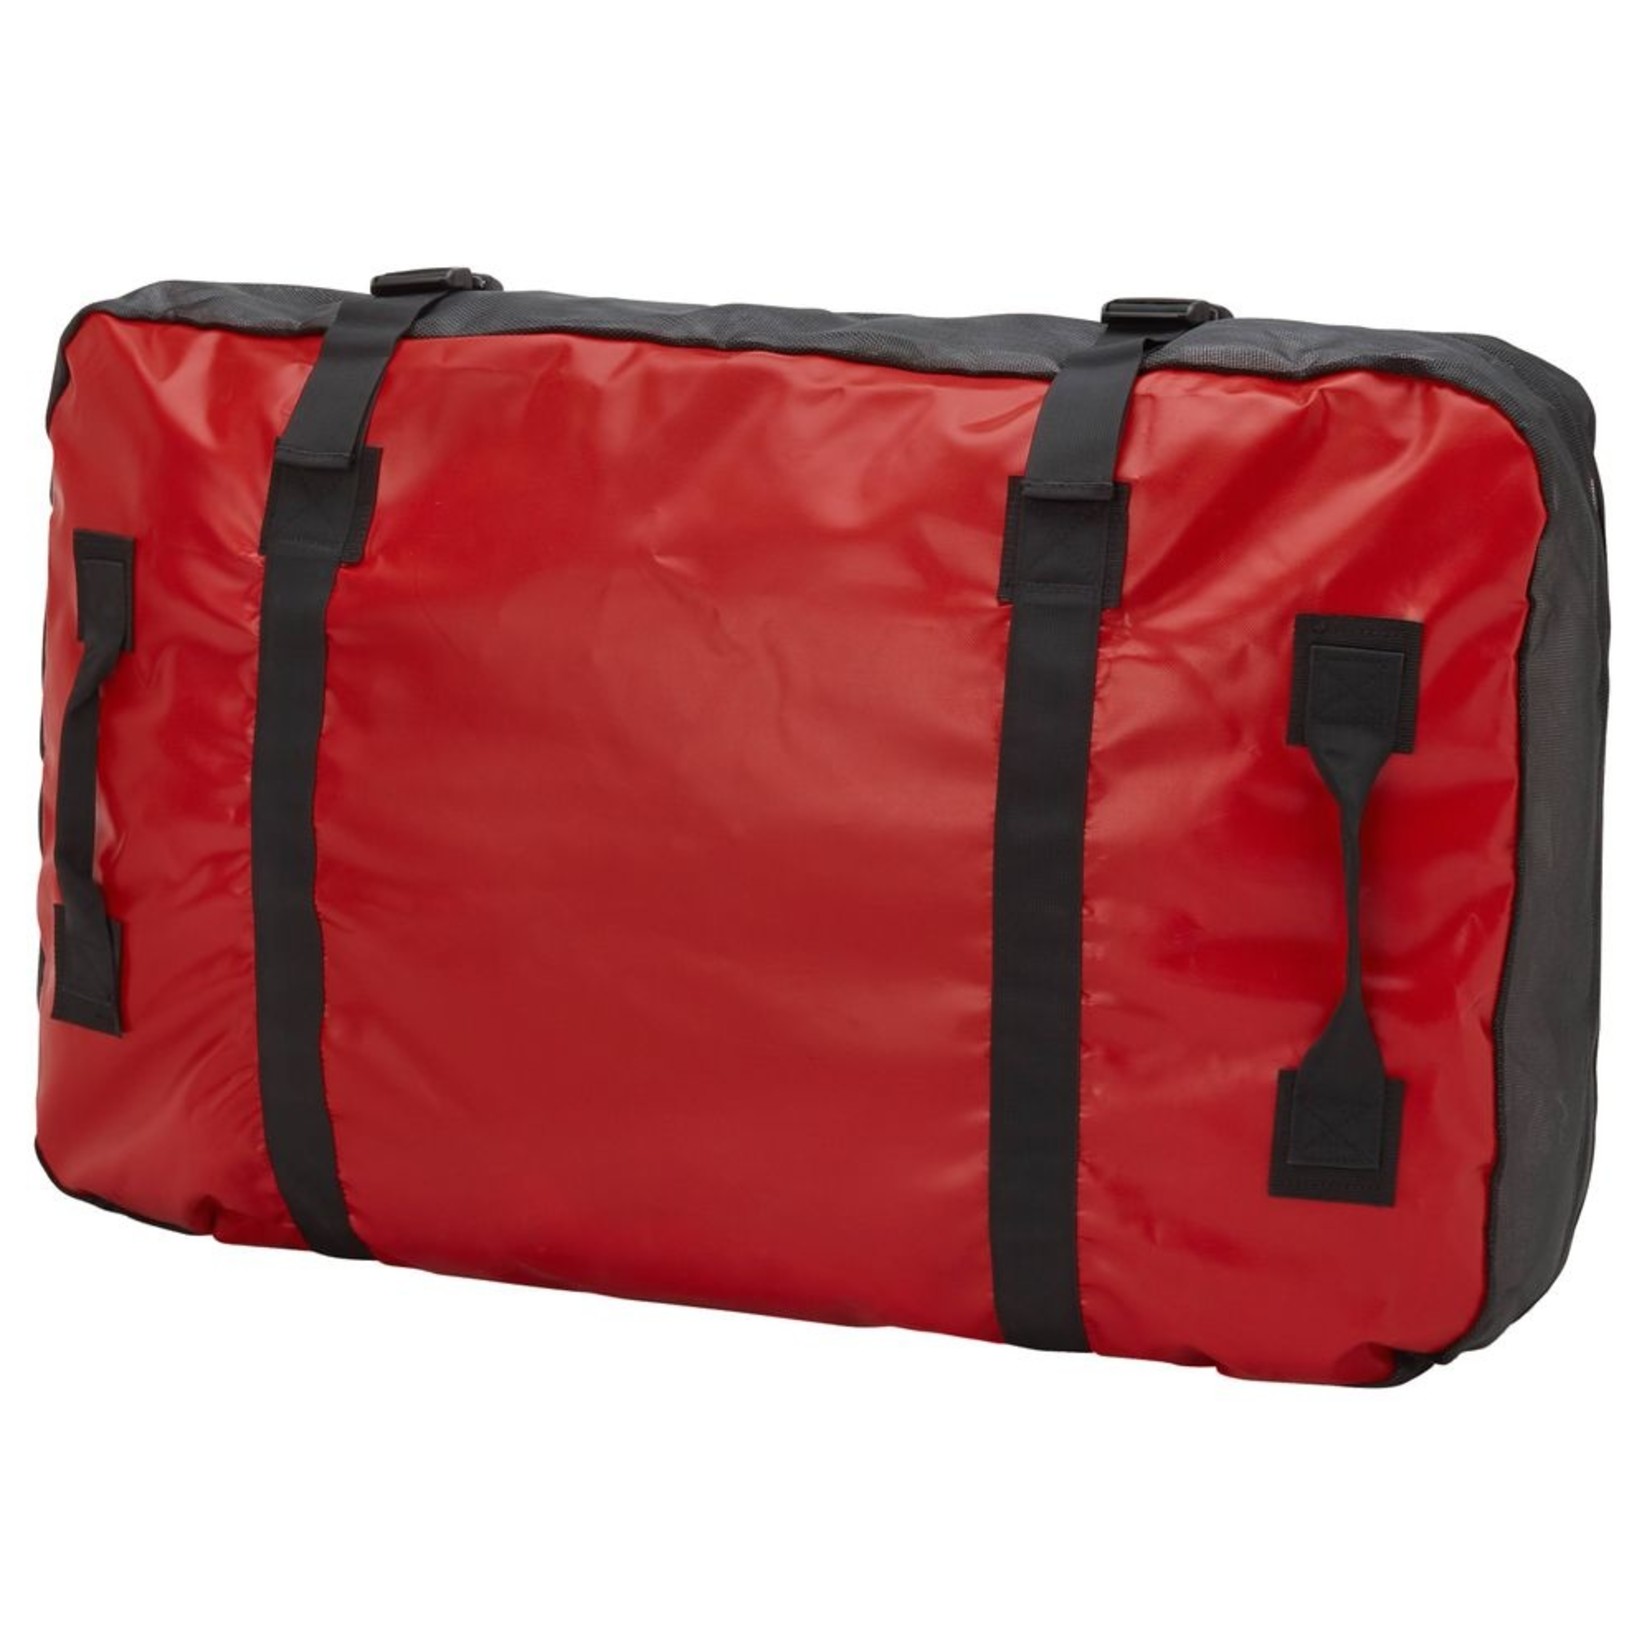 NRS Boat Bag for Rafts, IKs, and Cats